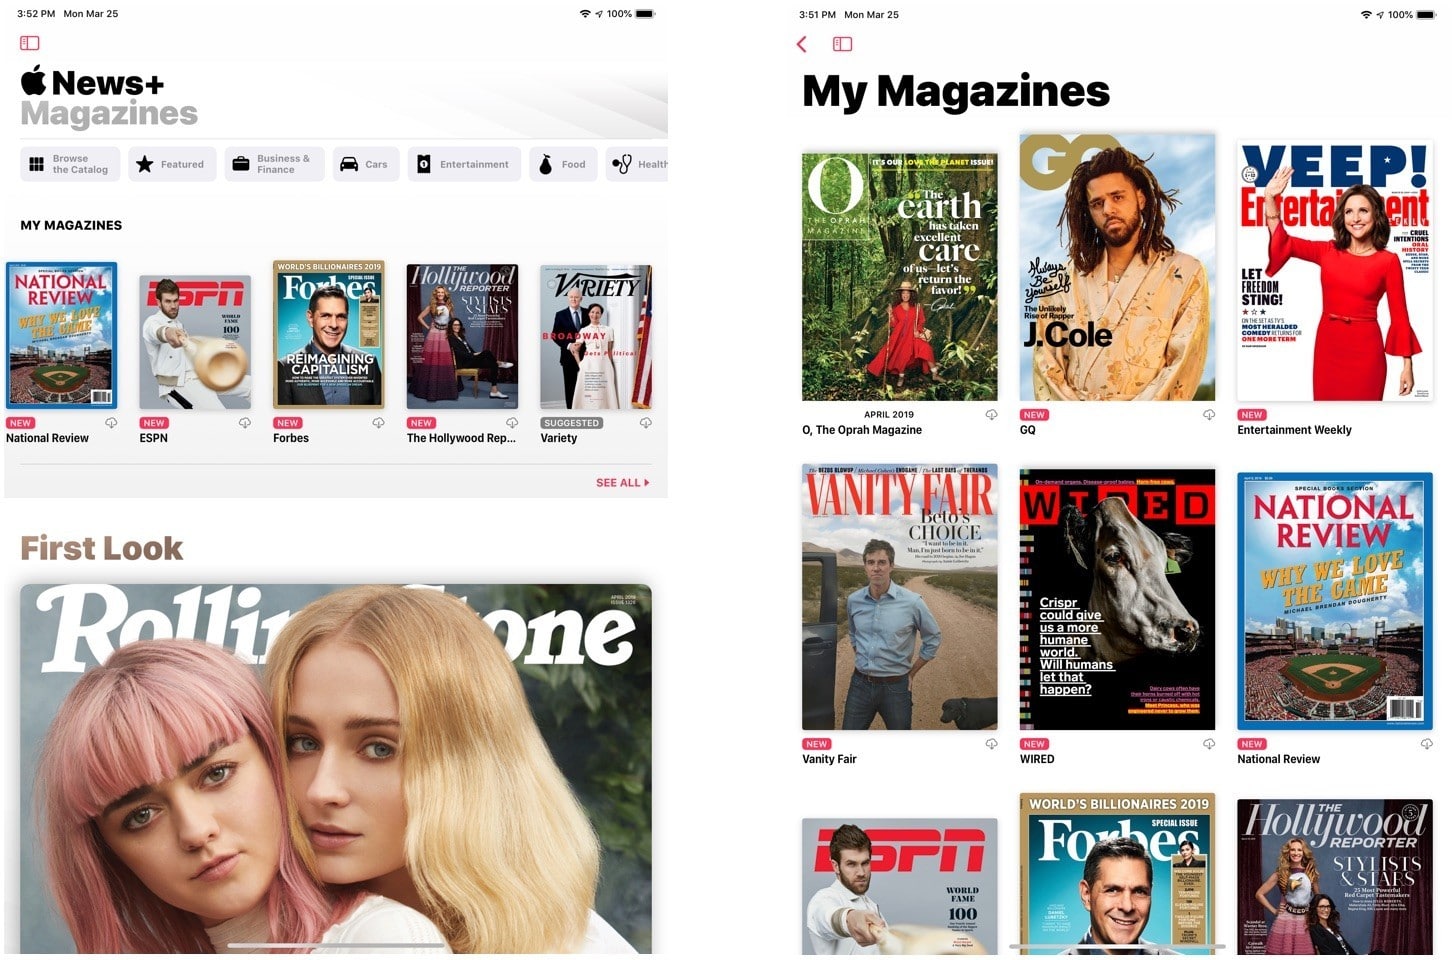 Apple News+ is an unlimited magazine and newspaper subscription.